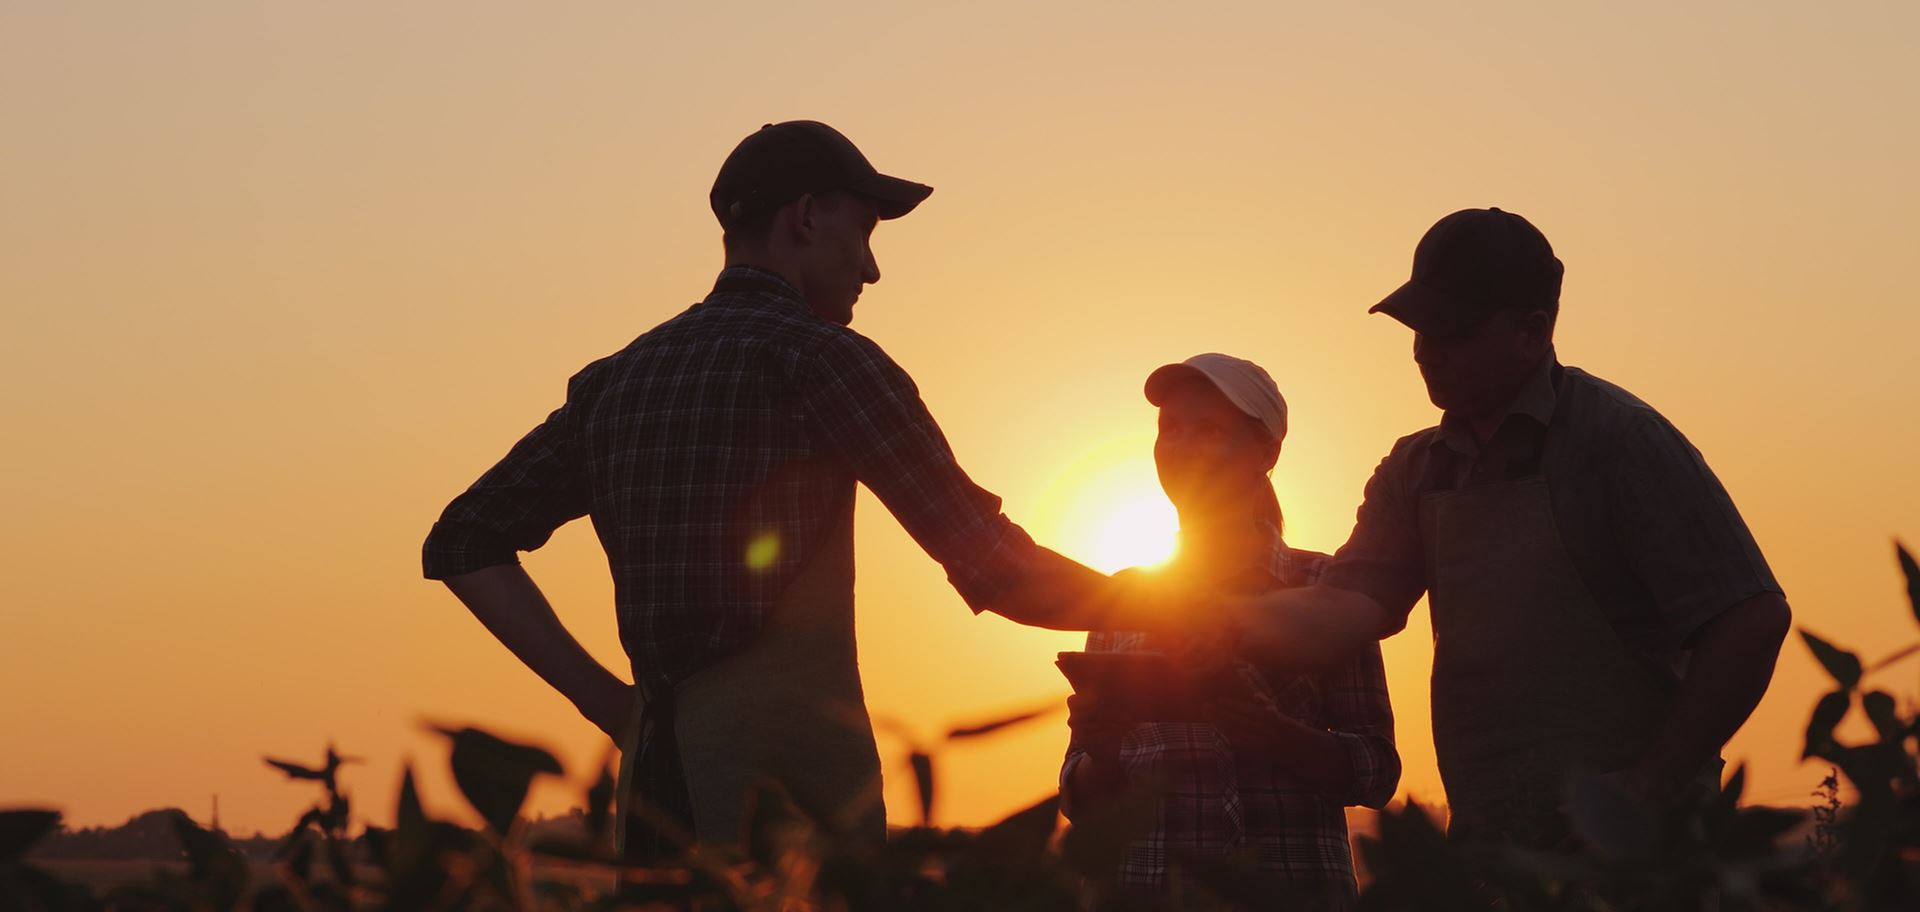 Farmers shaking hands in a wheat field at sun set